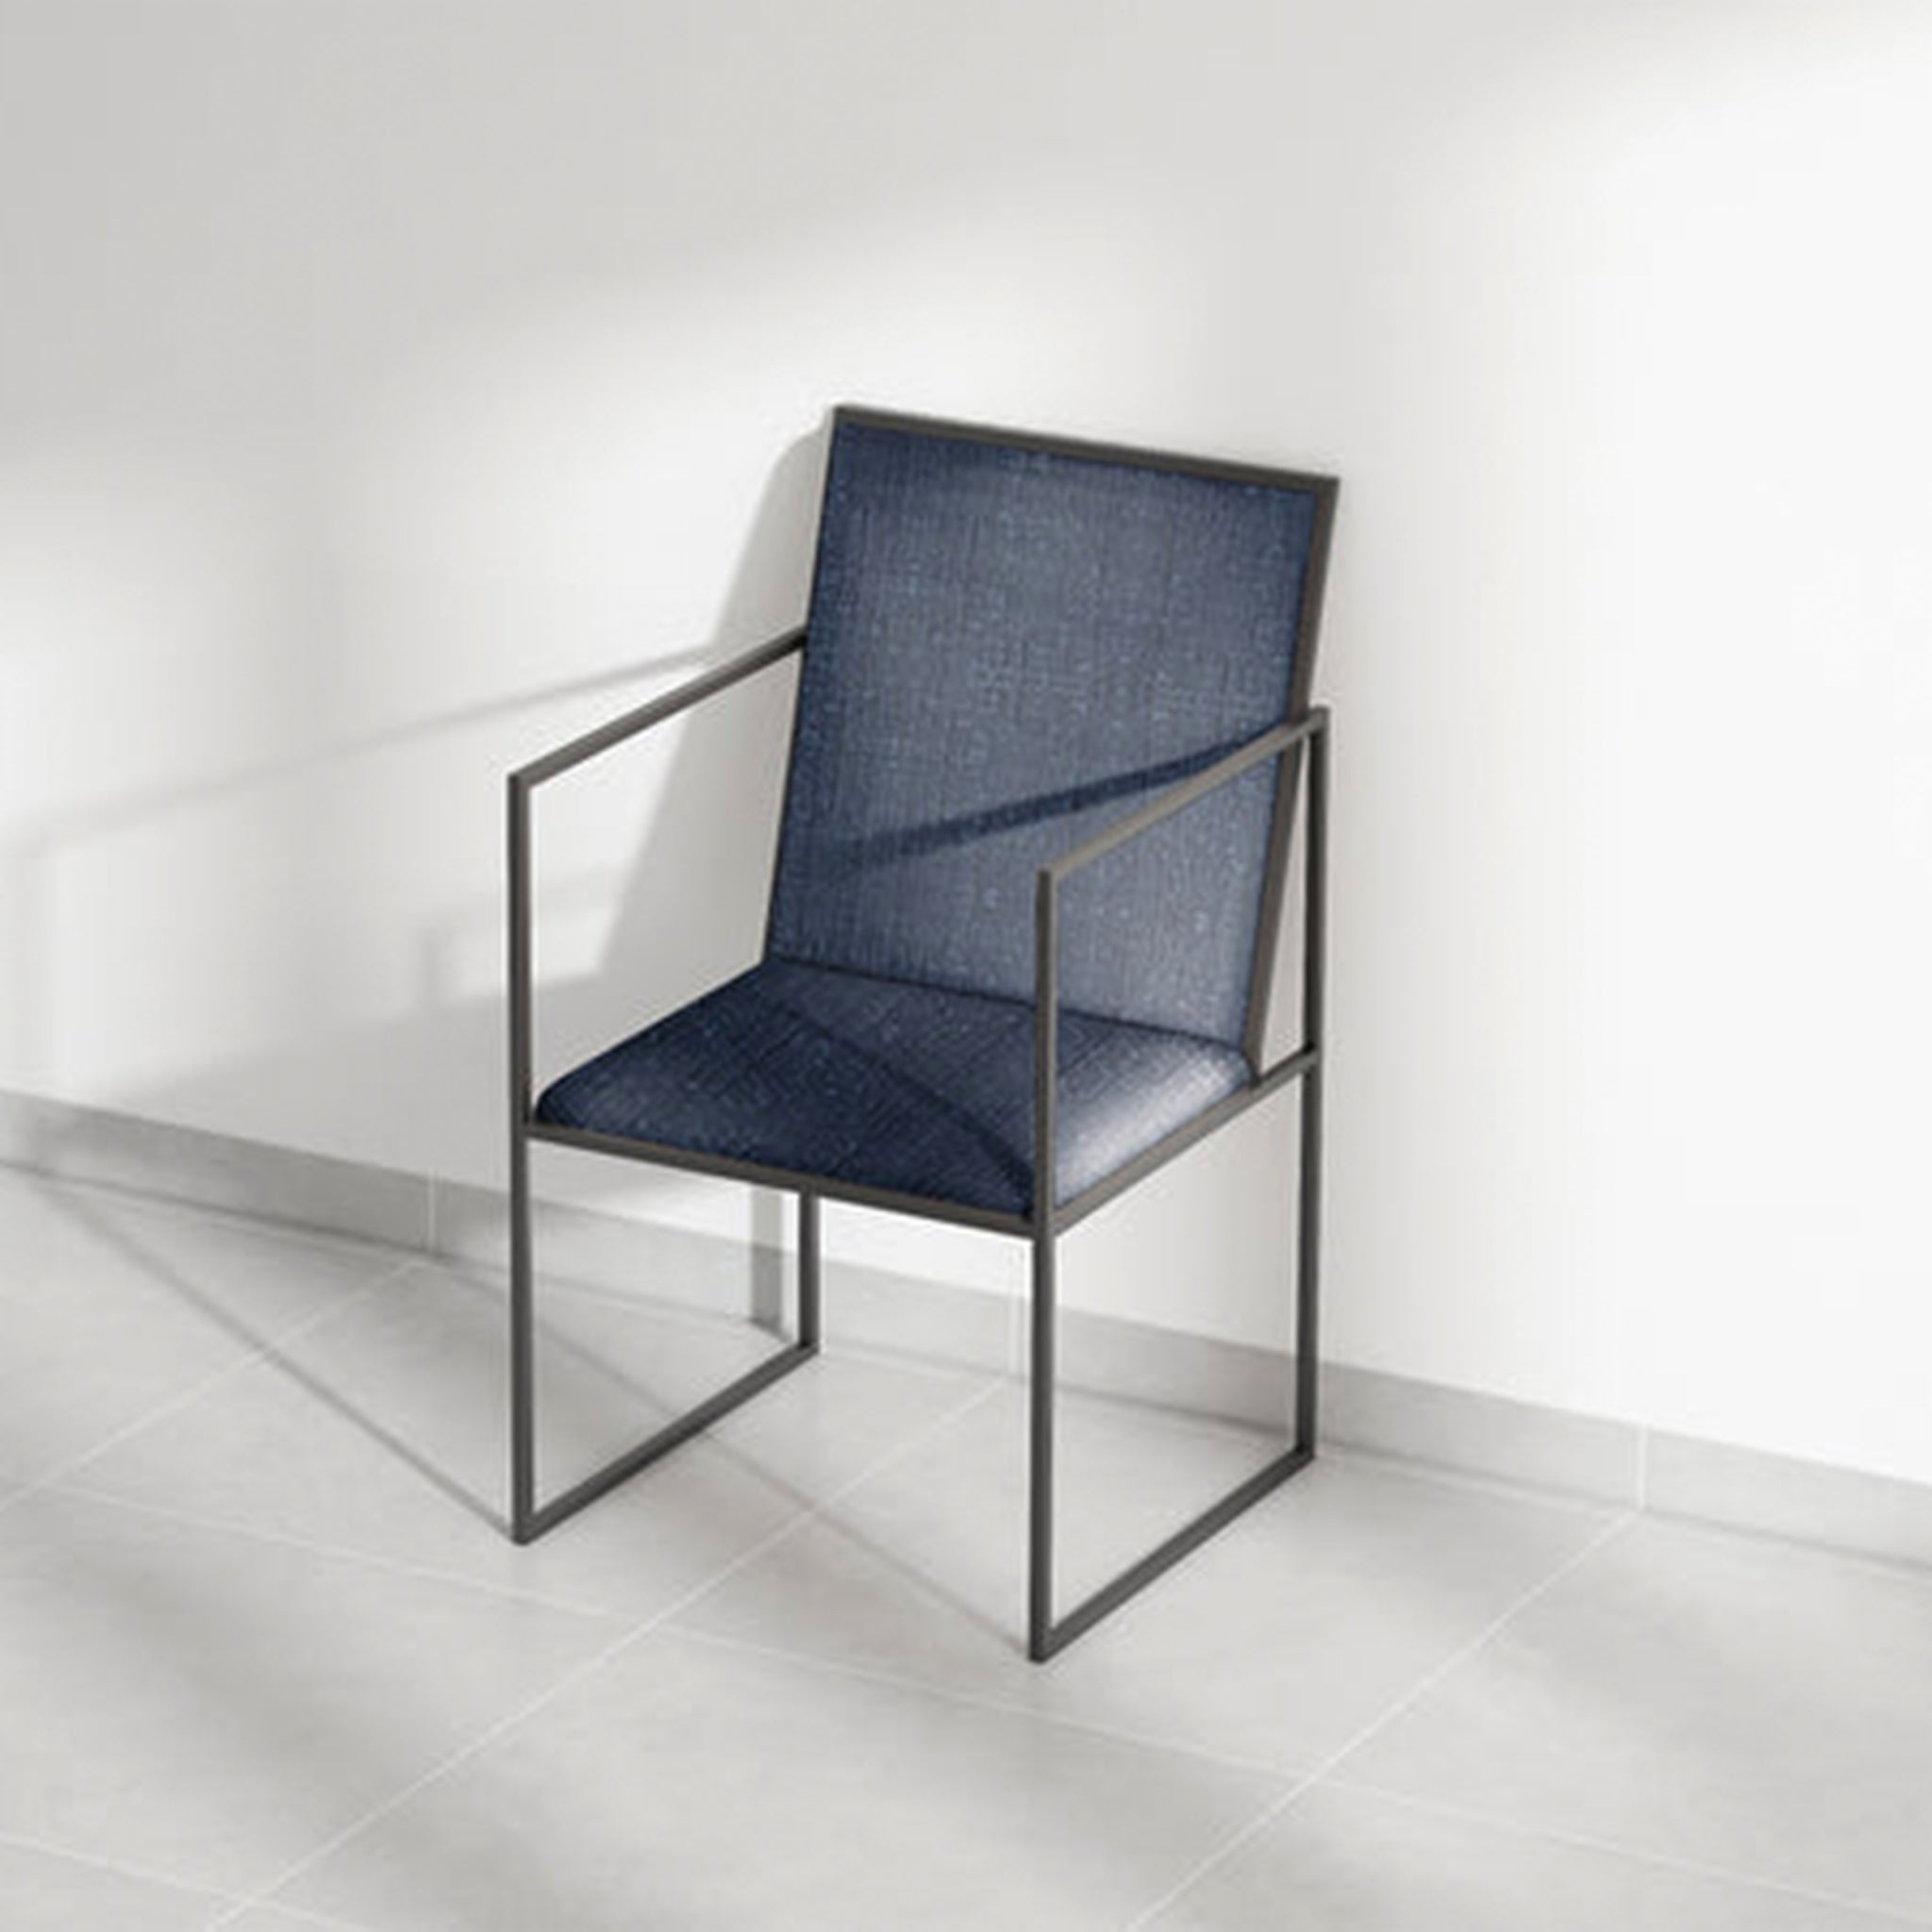 Comfortable dining chair with supportive arms and vibrant blue fabric